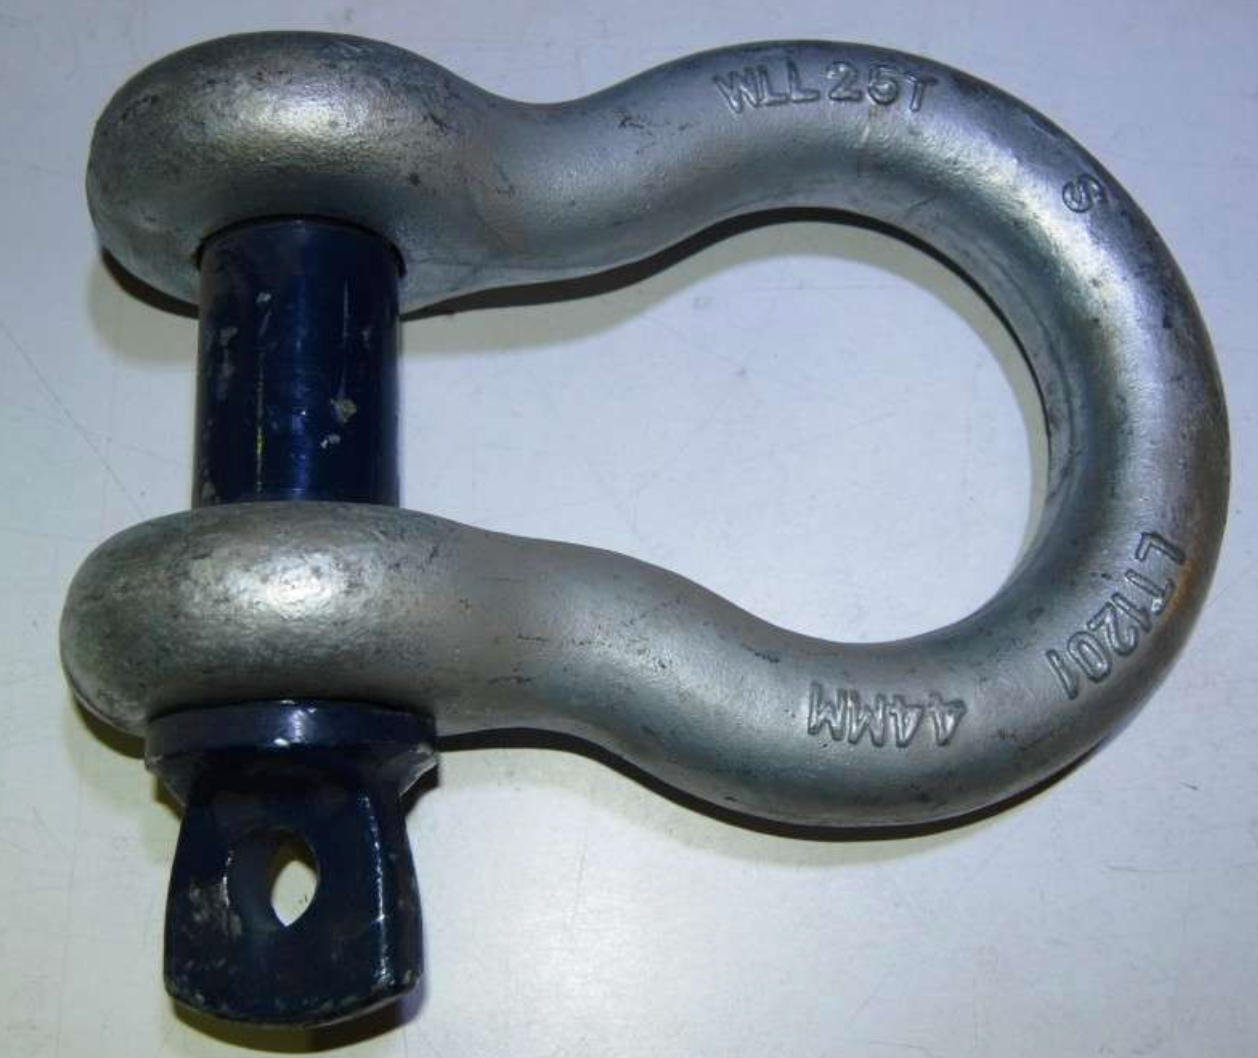 17.5 Tonne Shackle: High-Quality, European Rated for Secure Towing | Heavy-Duty Towing Equipment